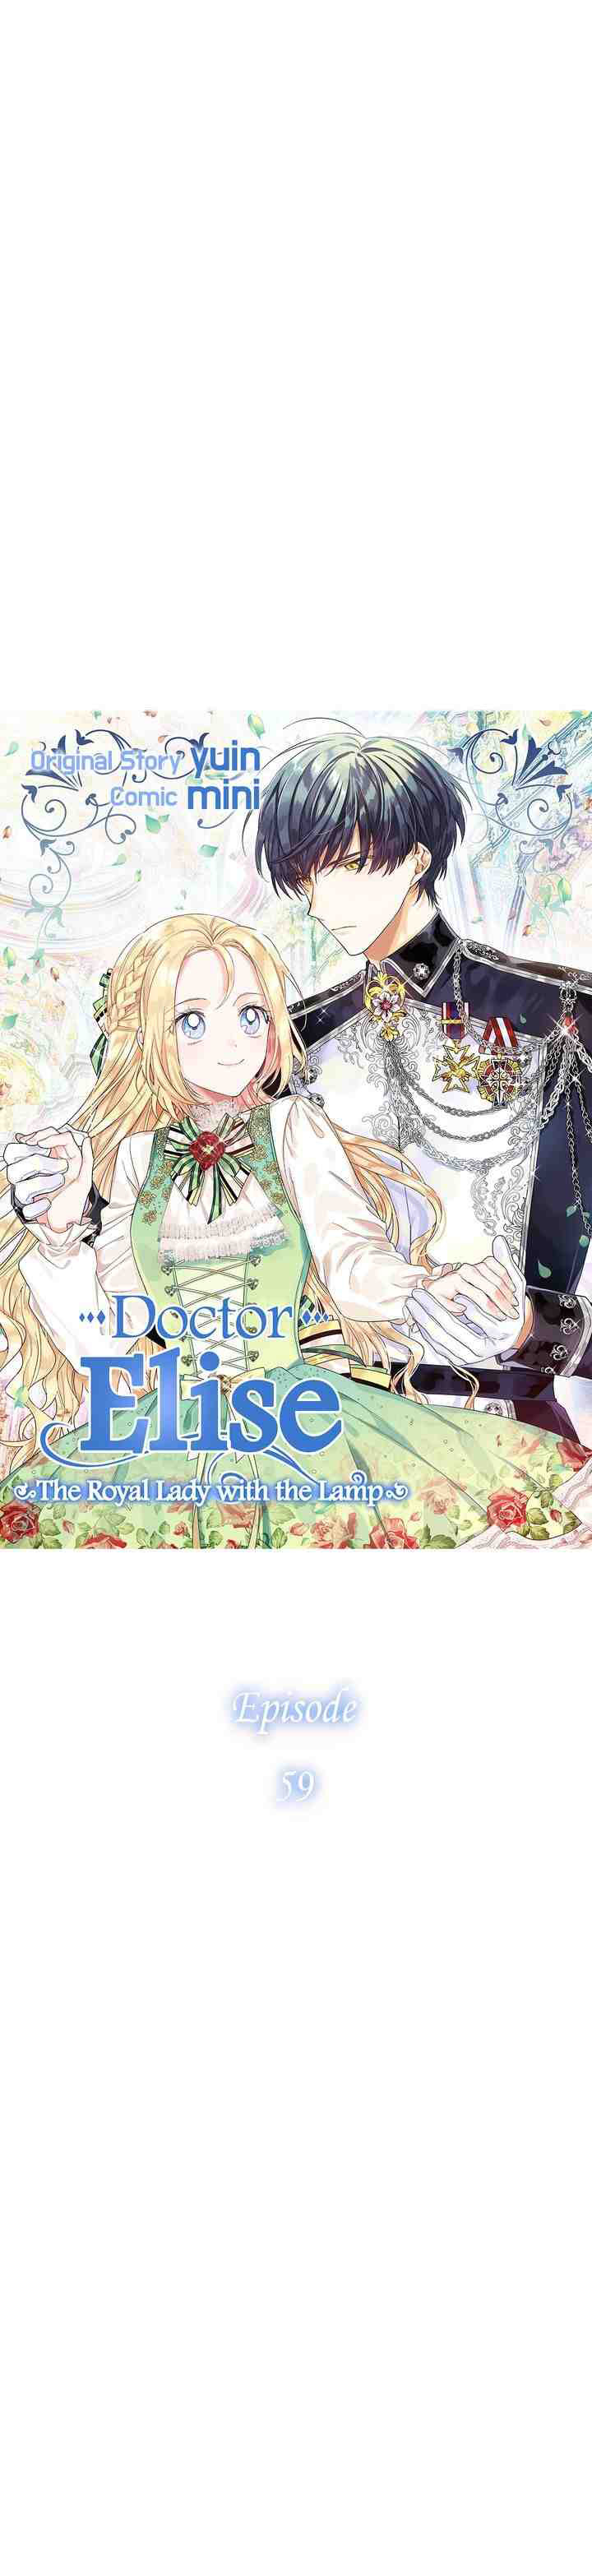 Doctor Elise: The Royal Lady with the Lamp Chapter 59